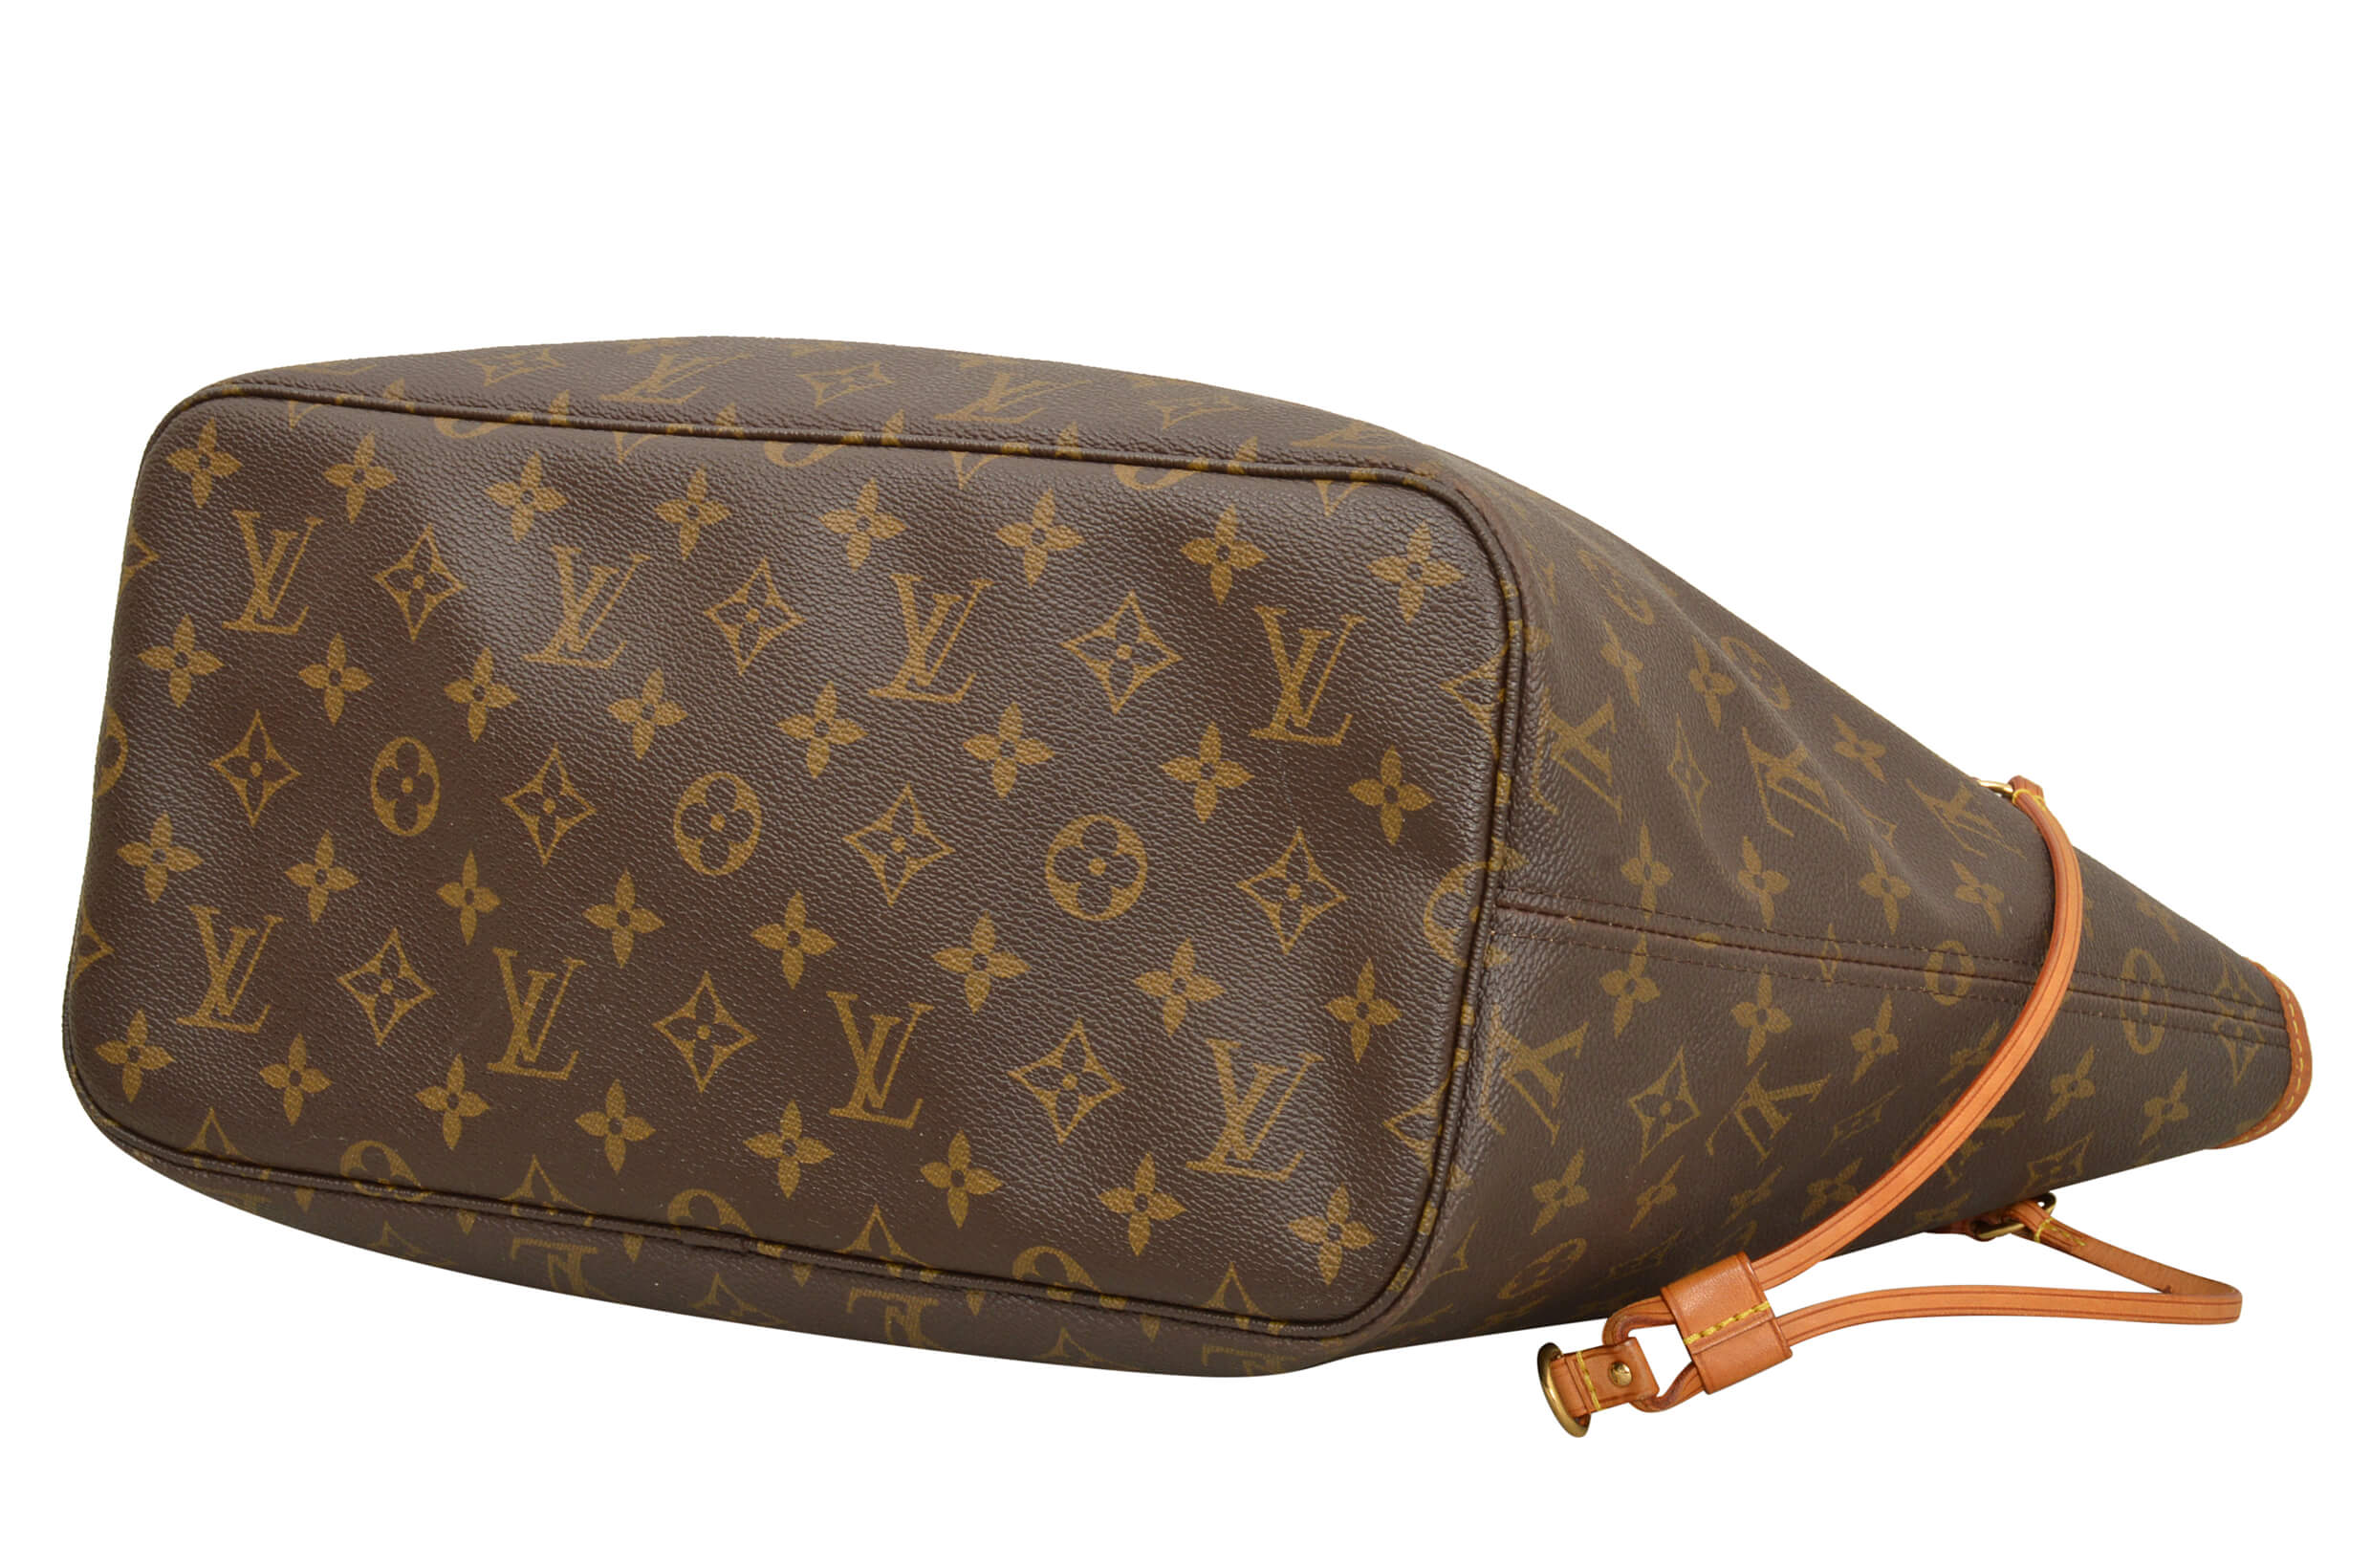 Ebay Louis Vuitton Neverfull Purses For 2018 | Confederated Tribes of the Umatilla Indian ...